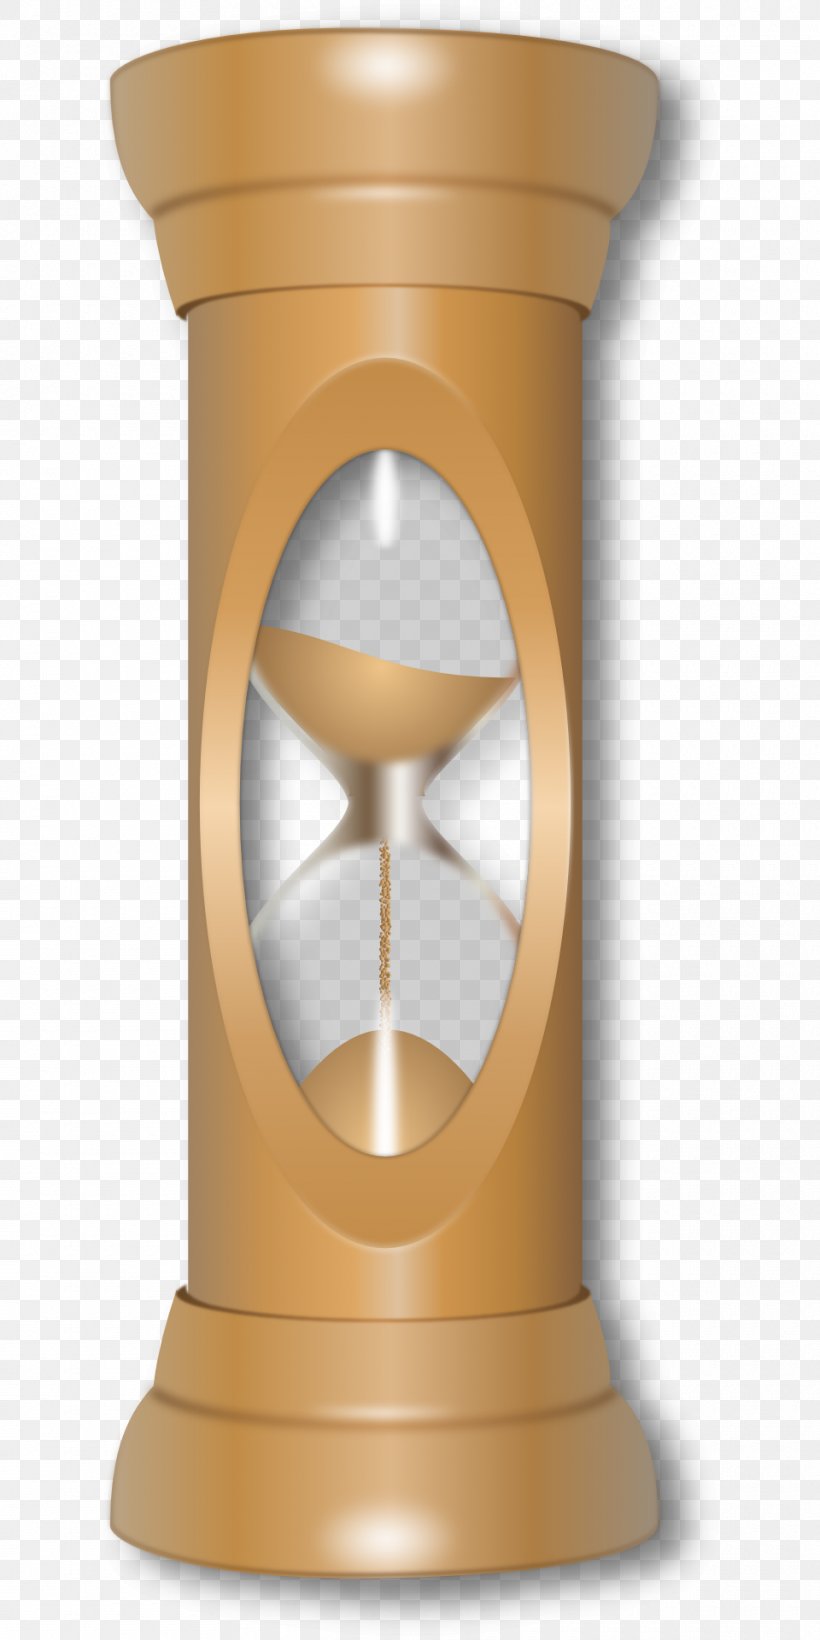 Hourglass Time Clip Art, PNG, 960x1920px, Hourglass, Clock, Cylinder, Hourglass Figure, Time Download Free